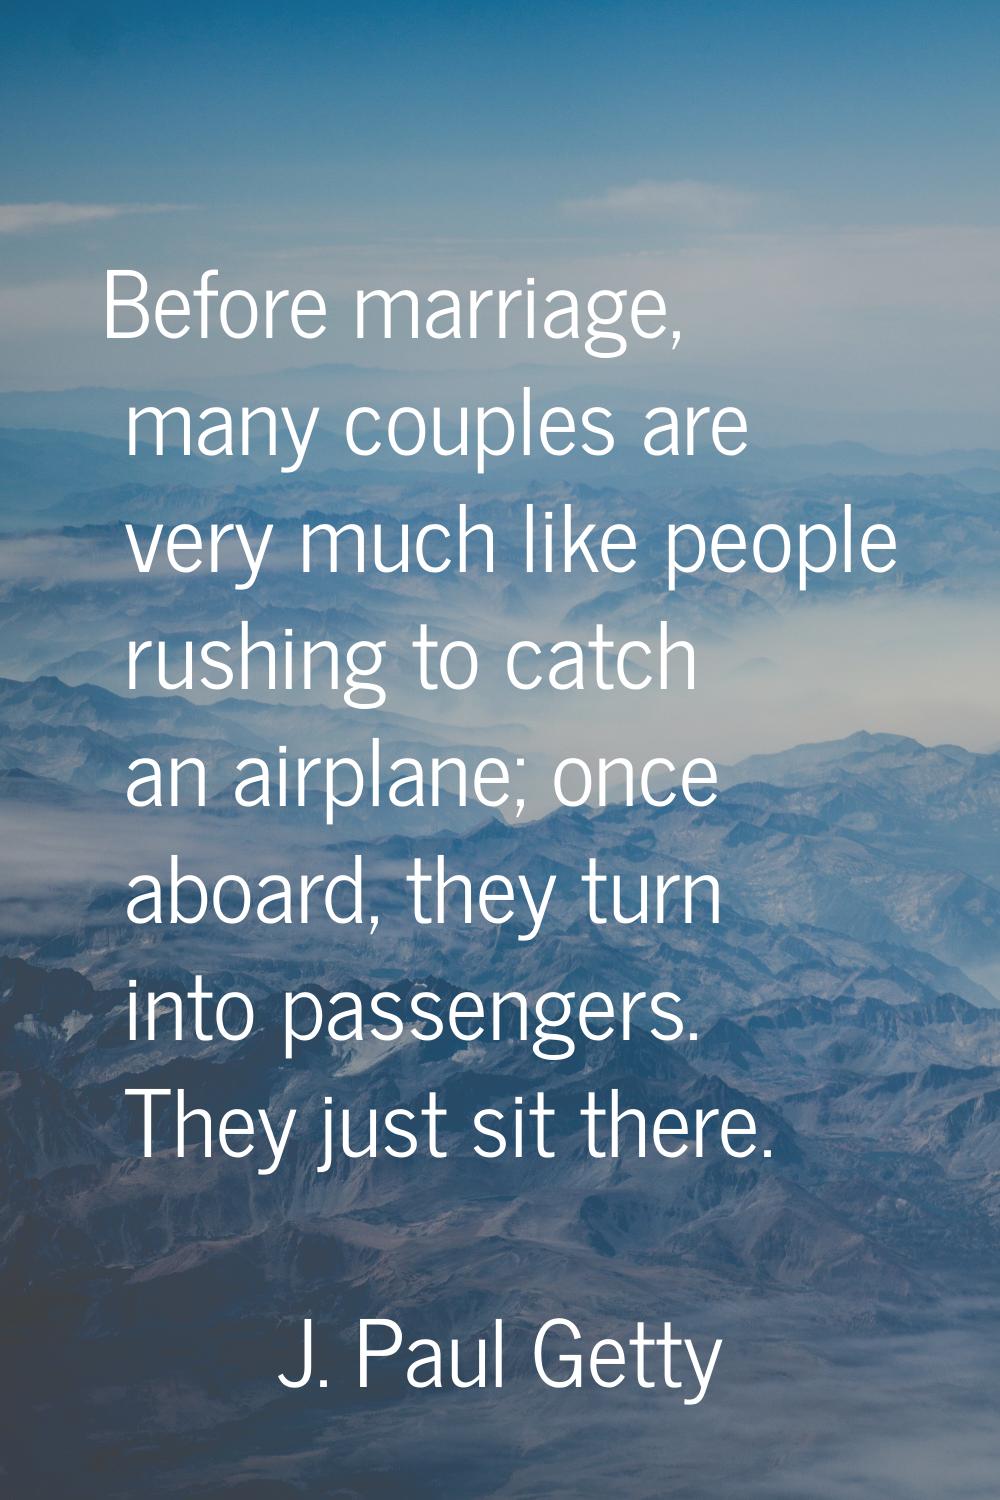 Before marriage, many couples are very much like people rushing to catch an airplane; once aboard, 